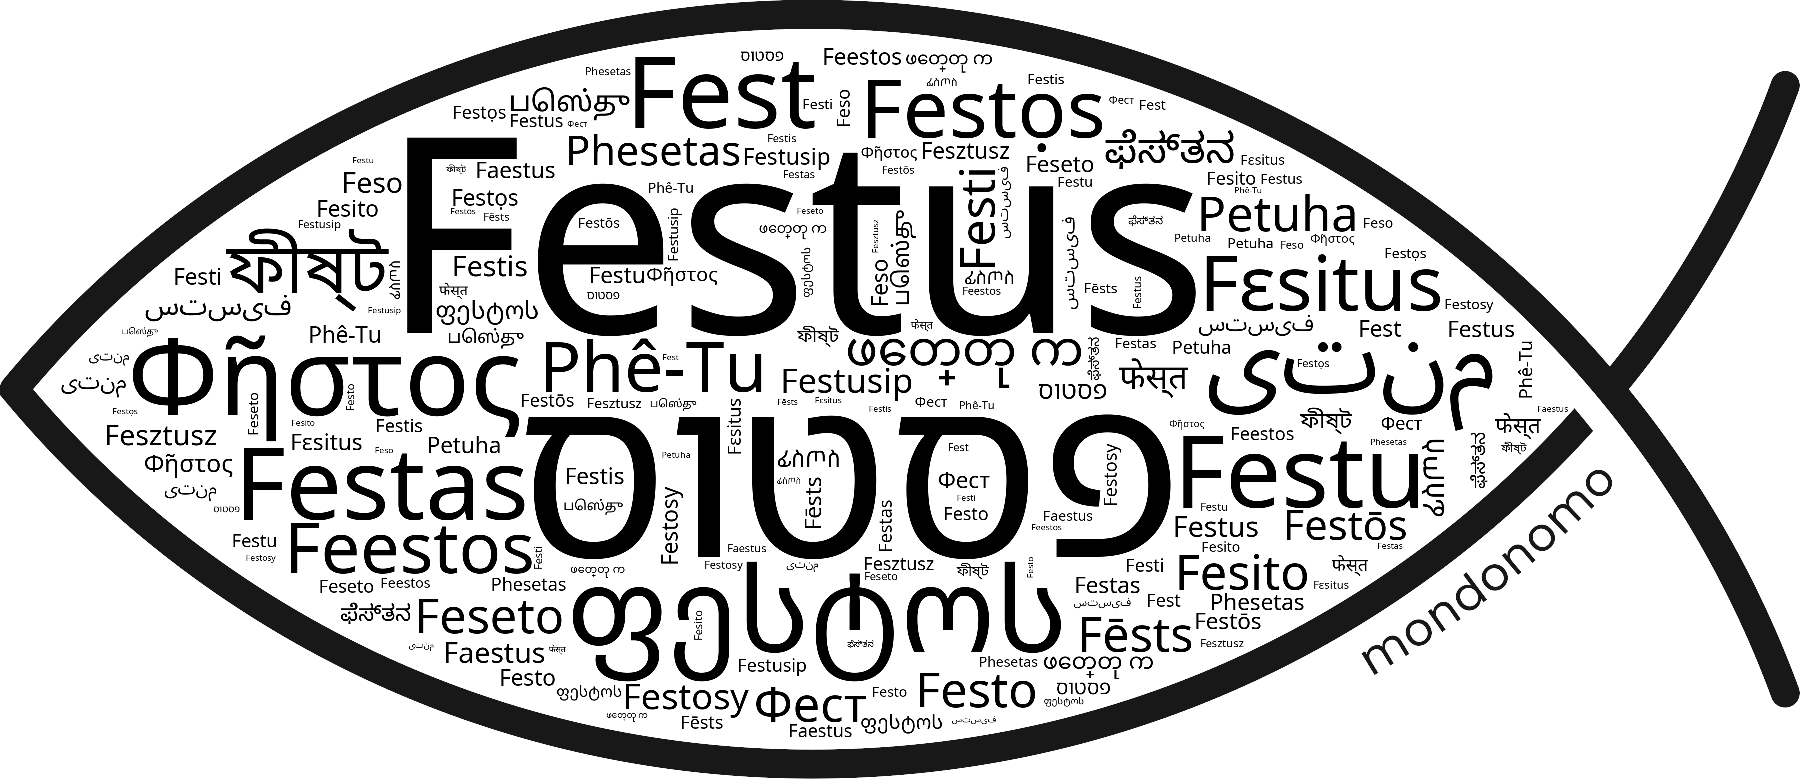 Name Festus in the world's Bibles